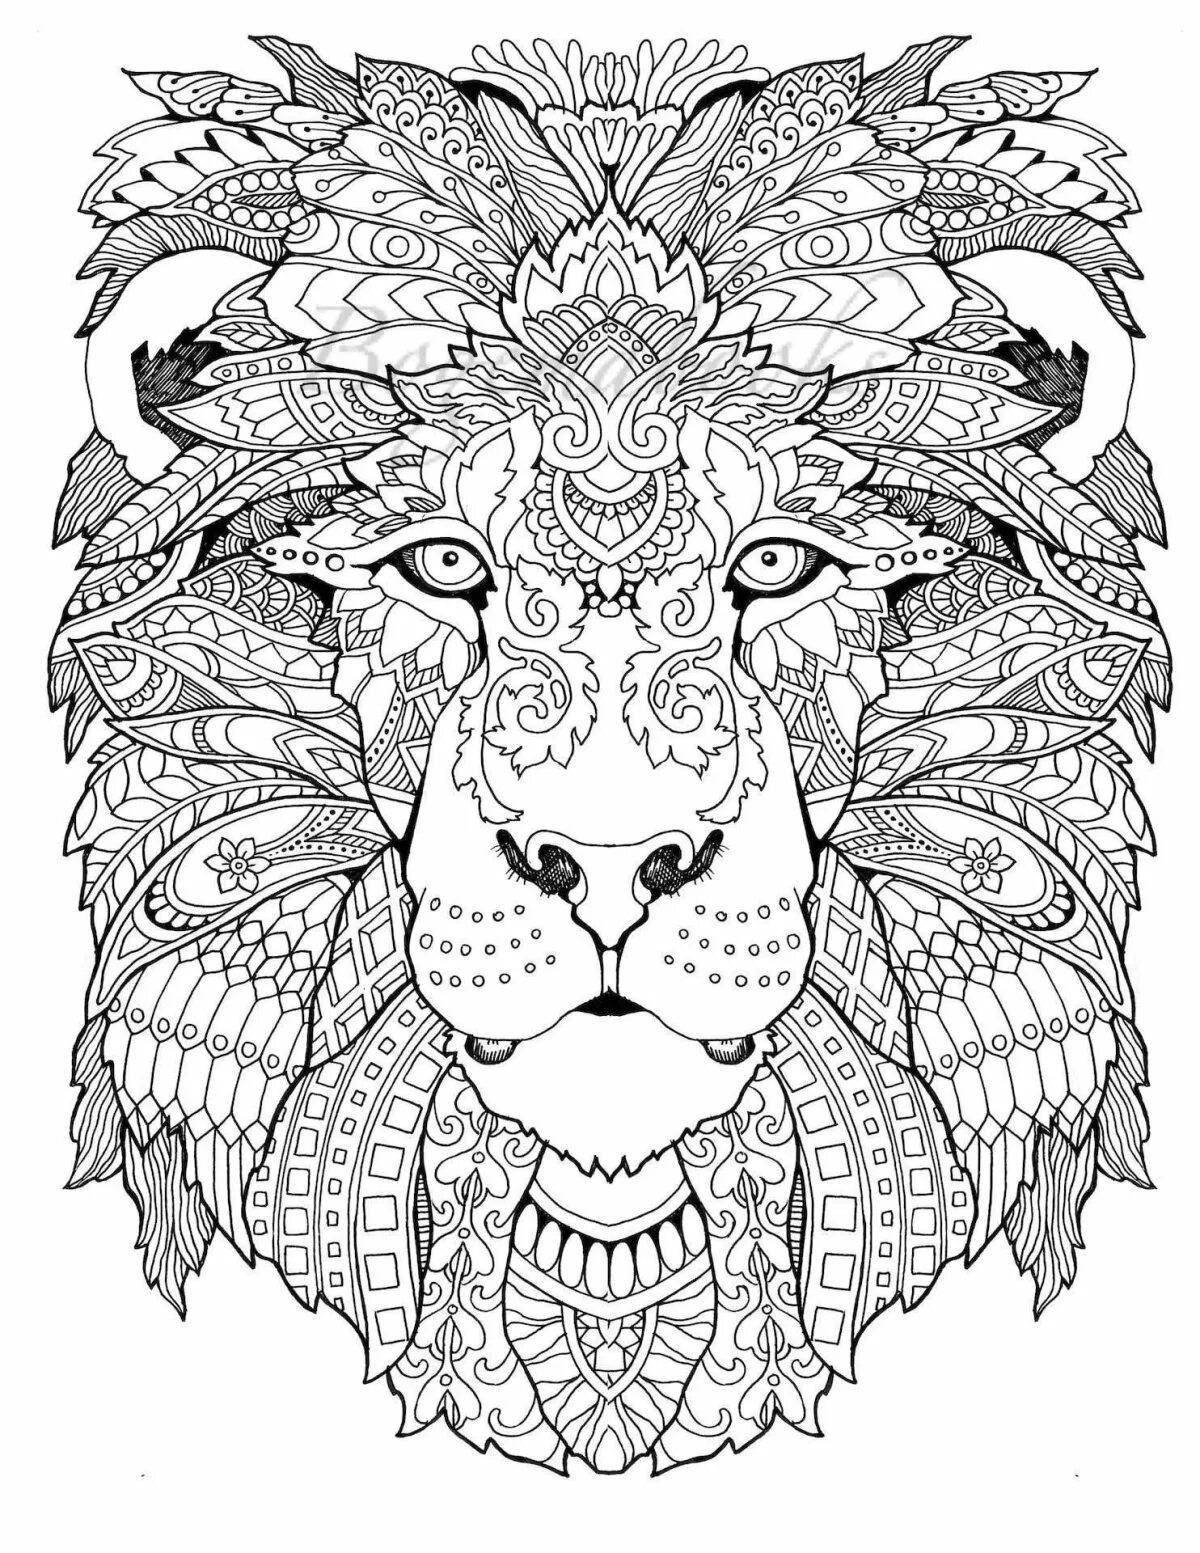 Luxury comprehensive anti-stress coloring book